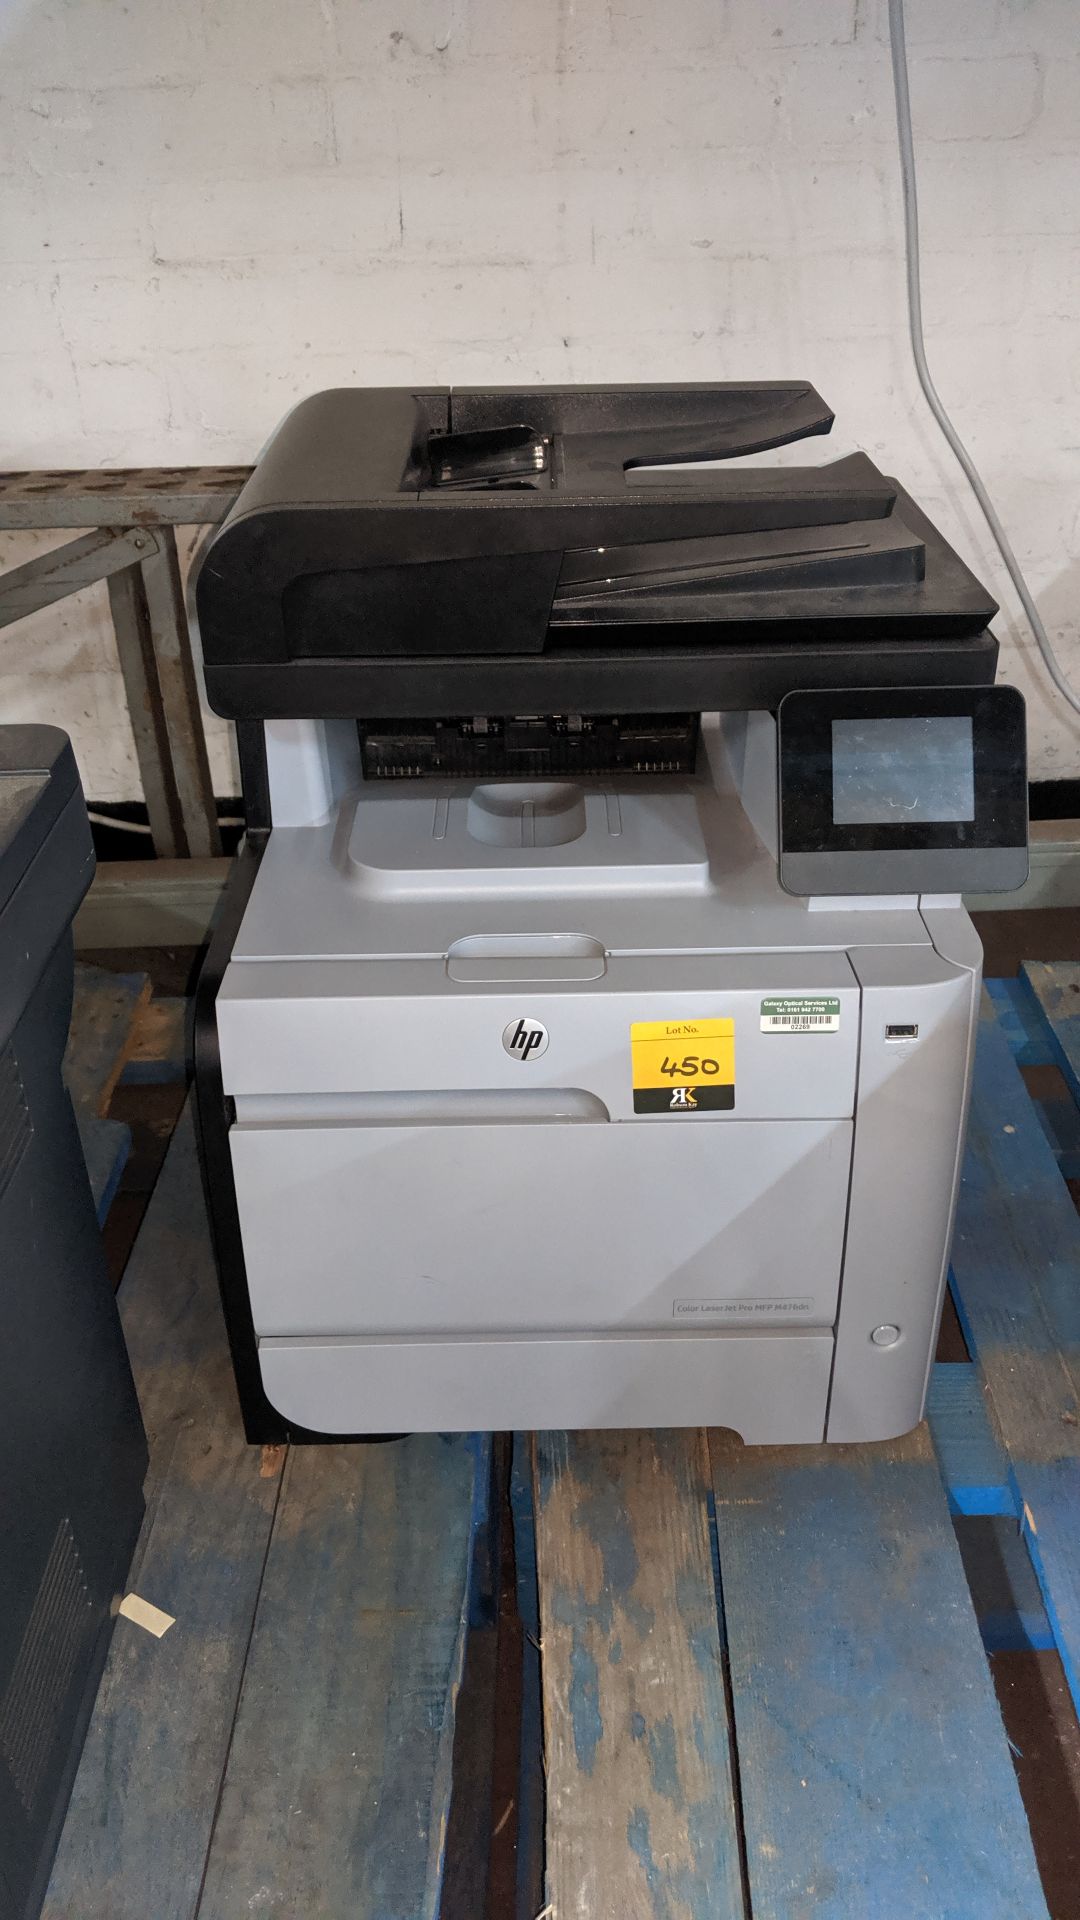 HP LaserJet Pro MFP M476DN multifunction printer. This is one of a large number of lots being sold - Image 2 of 2